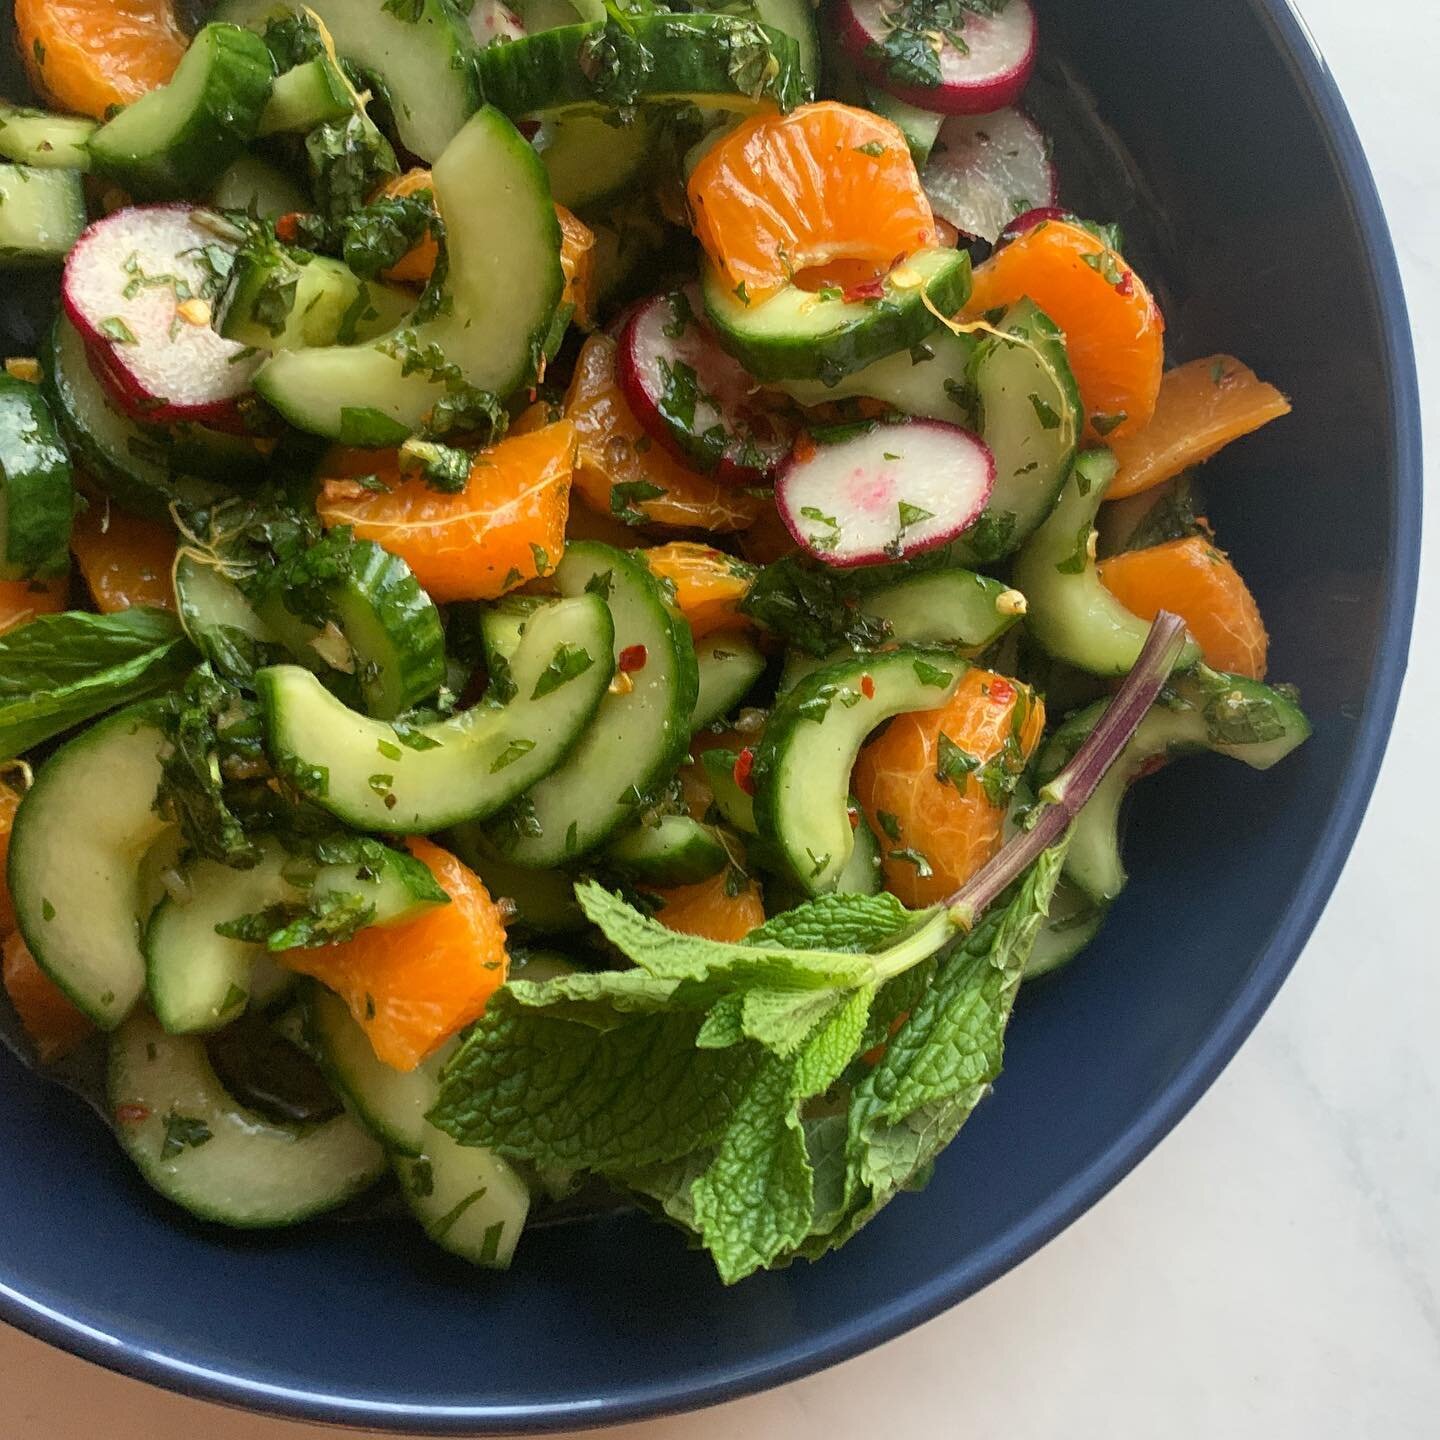 Cucumber, clementine, and mint salad (snuck in a few radishes too) adapted from the @when.way cookbook @drcrupain @drmichaelroizen